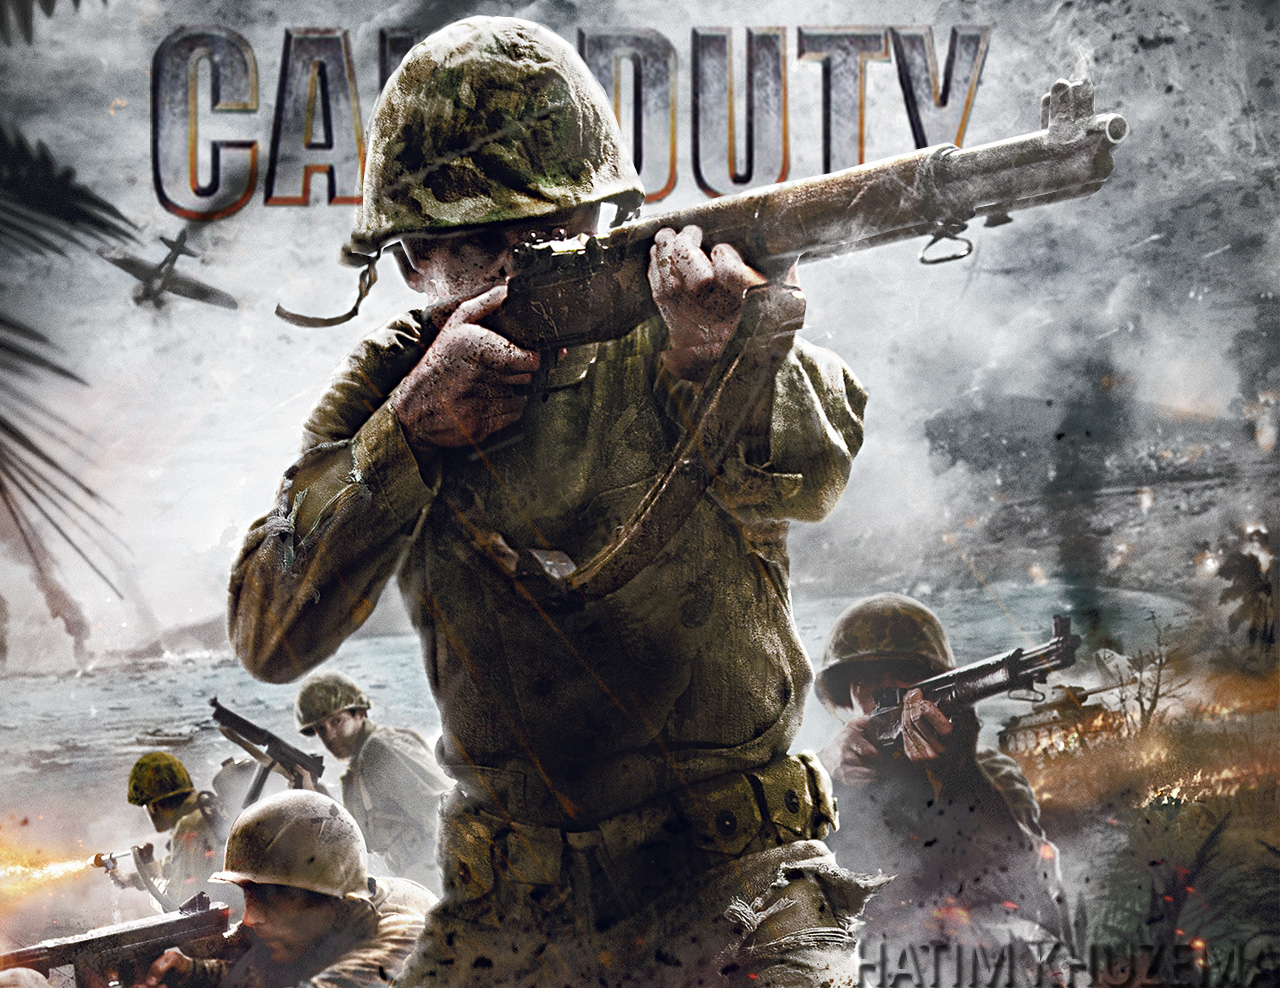 call-of-duty-1-pc-game-highly-compressed-422-mb-hatim-s-blogger-the